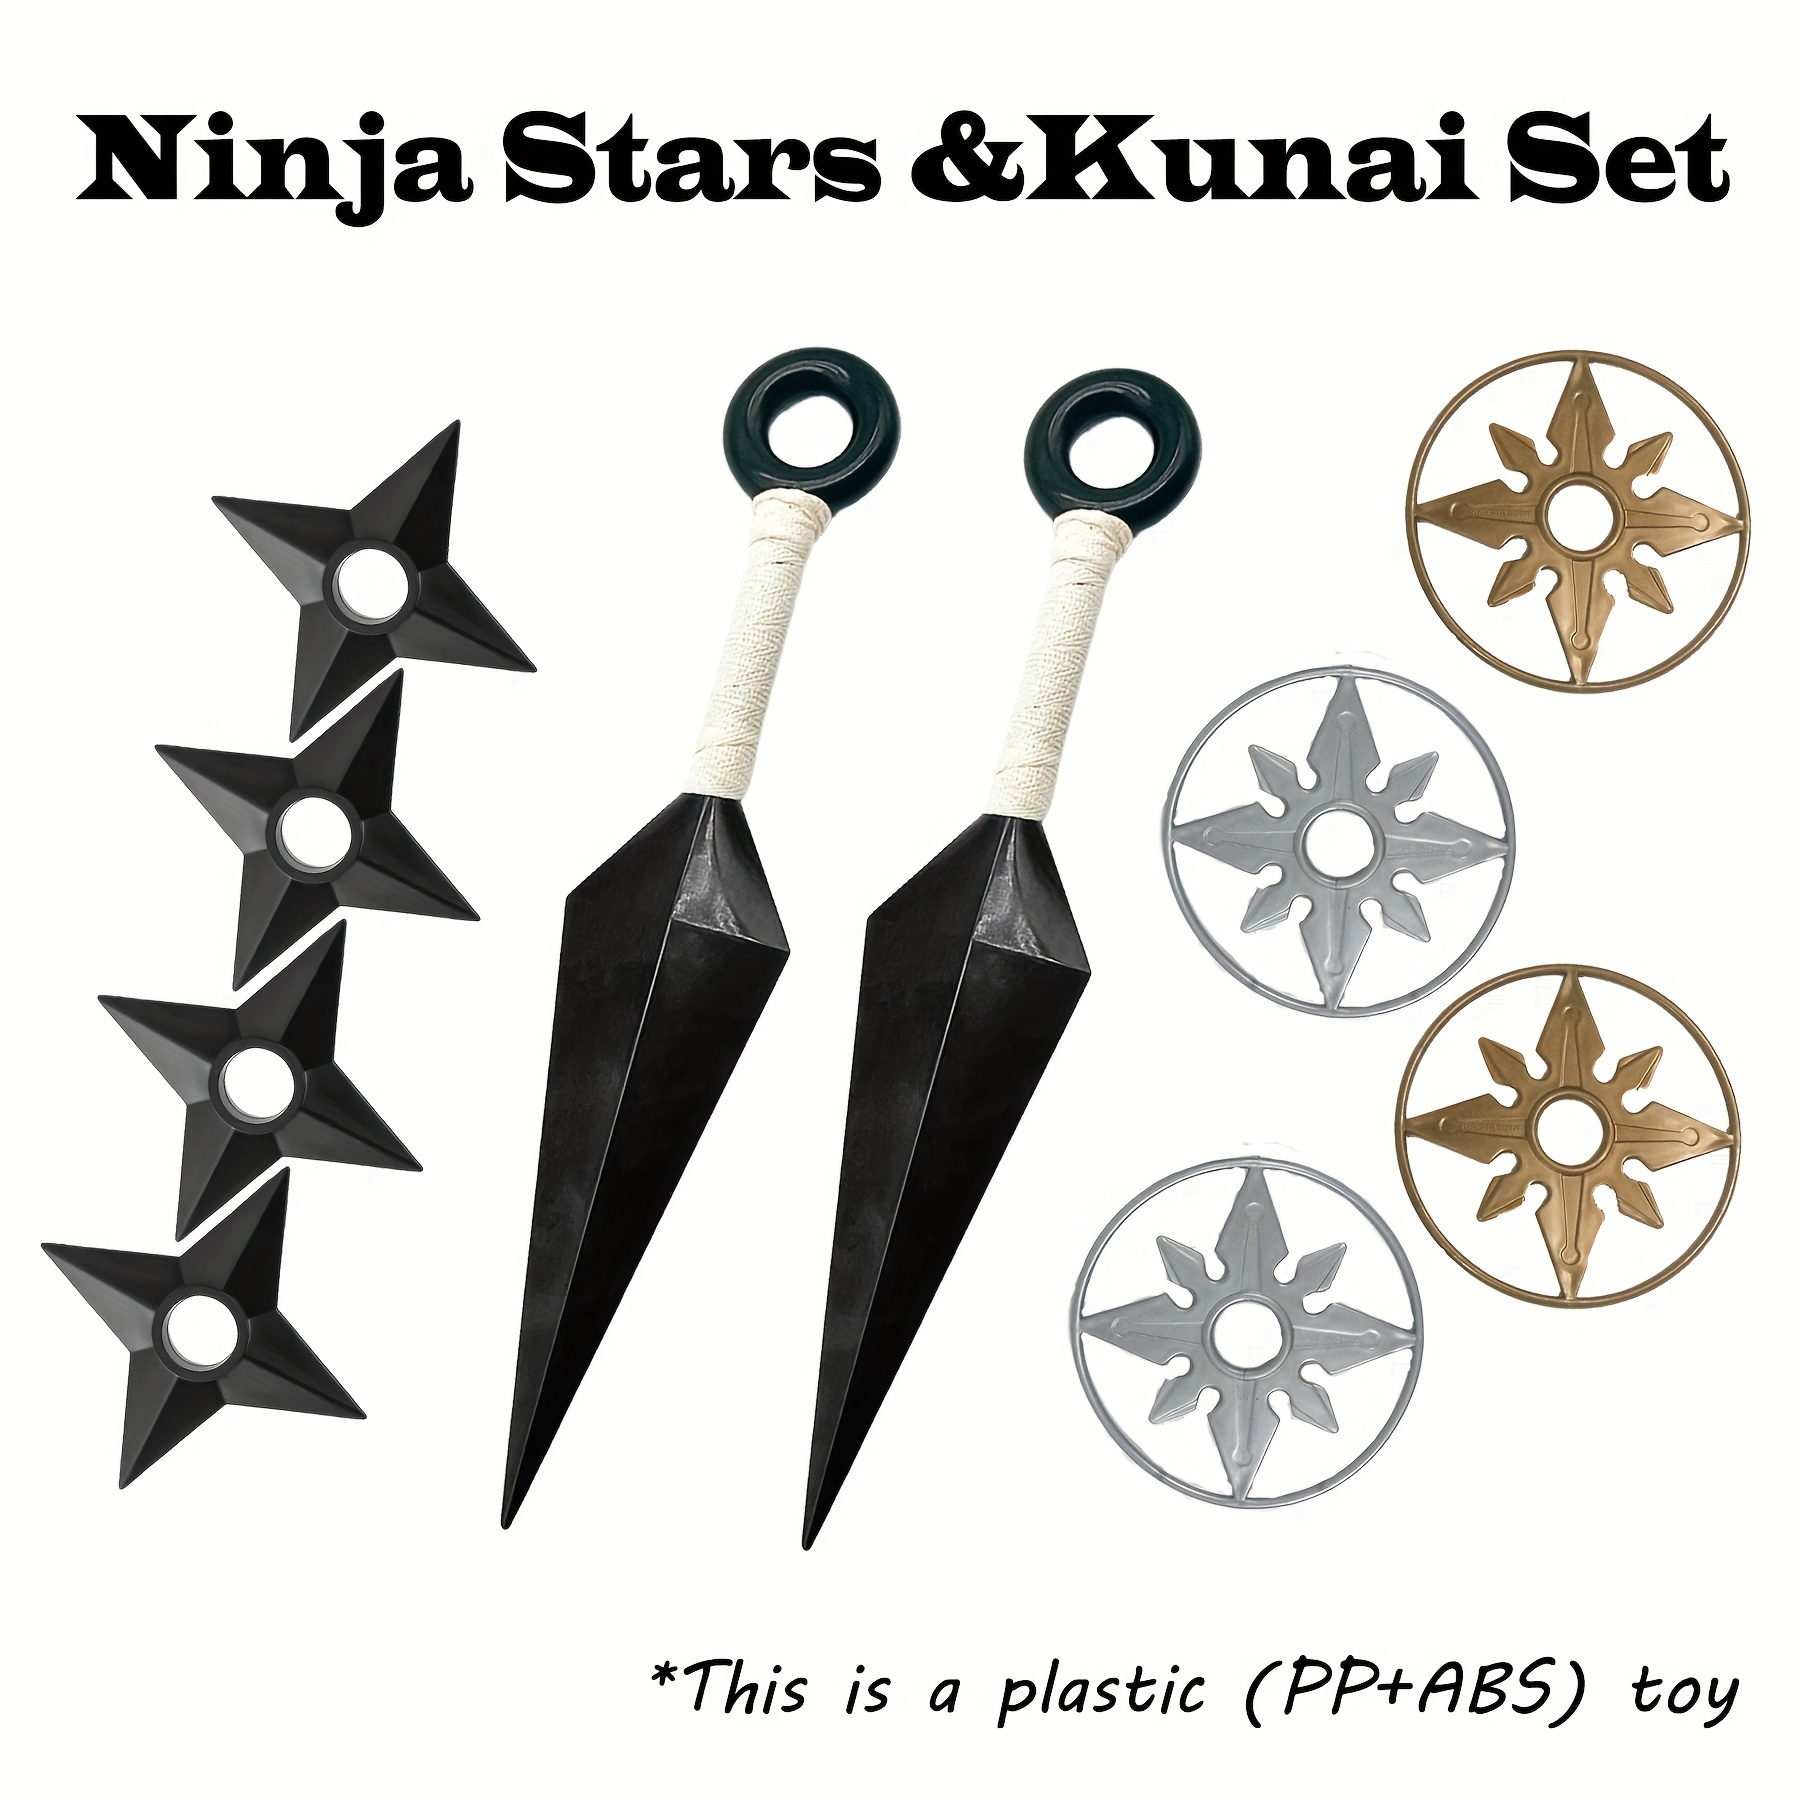 Ninja/Knight Set For Kids, Helmet, Chest Piece, Shield, Sword, Bow And  Arrow Archery Set, Toy Weapons For Kids Pretend Role Play, Cosplay, Costume  Acc